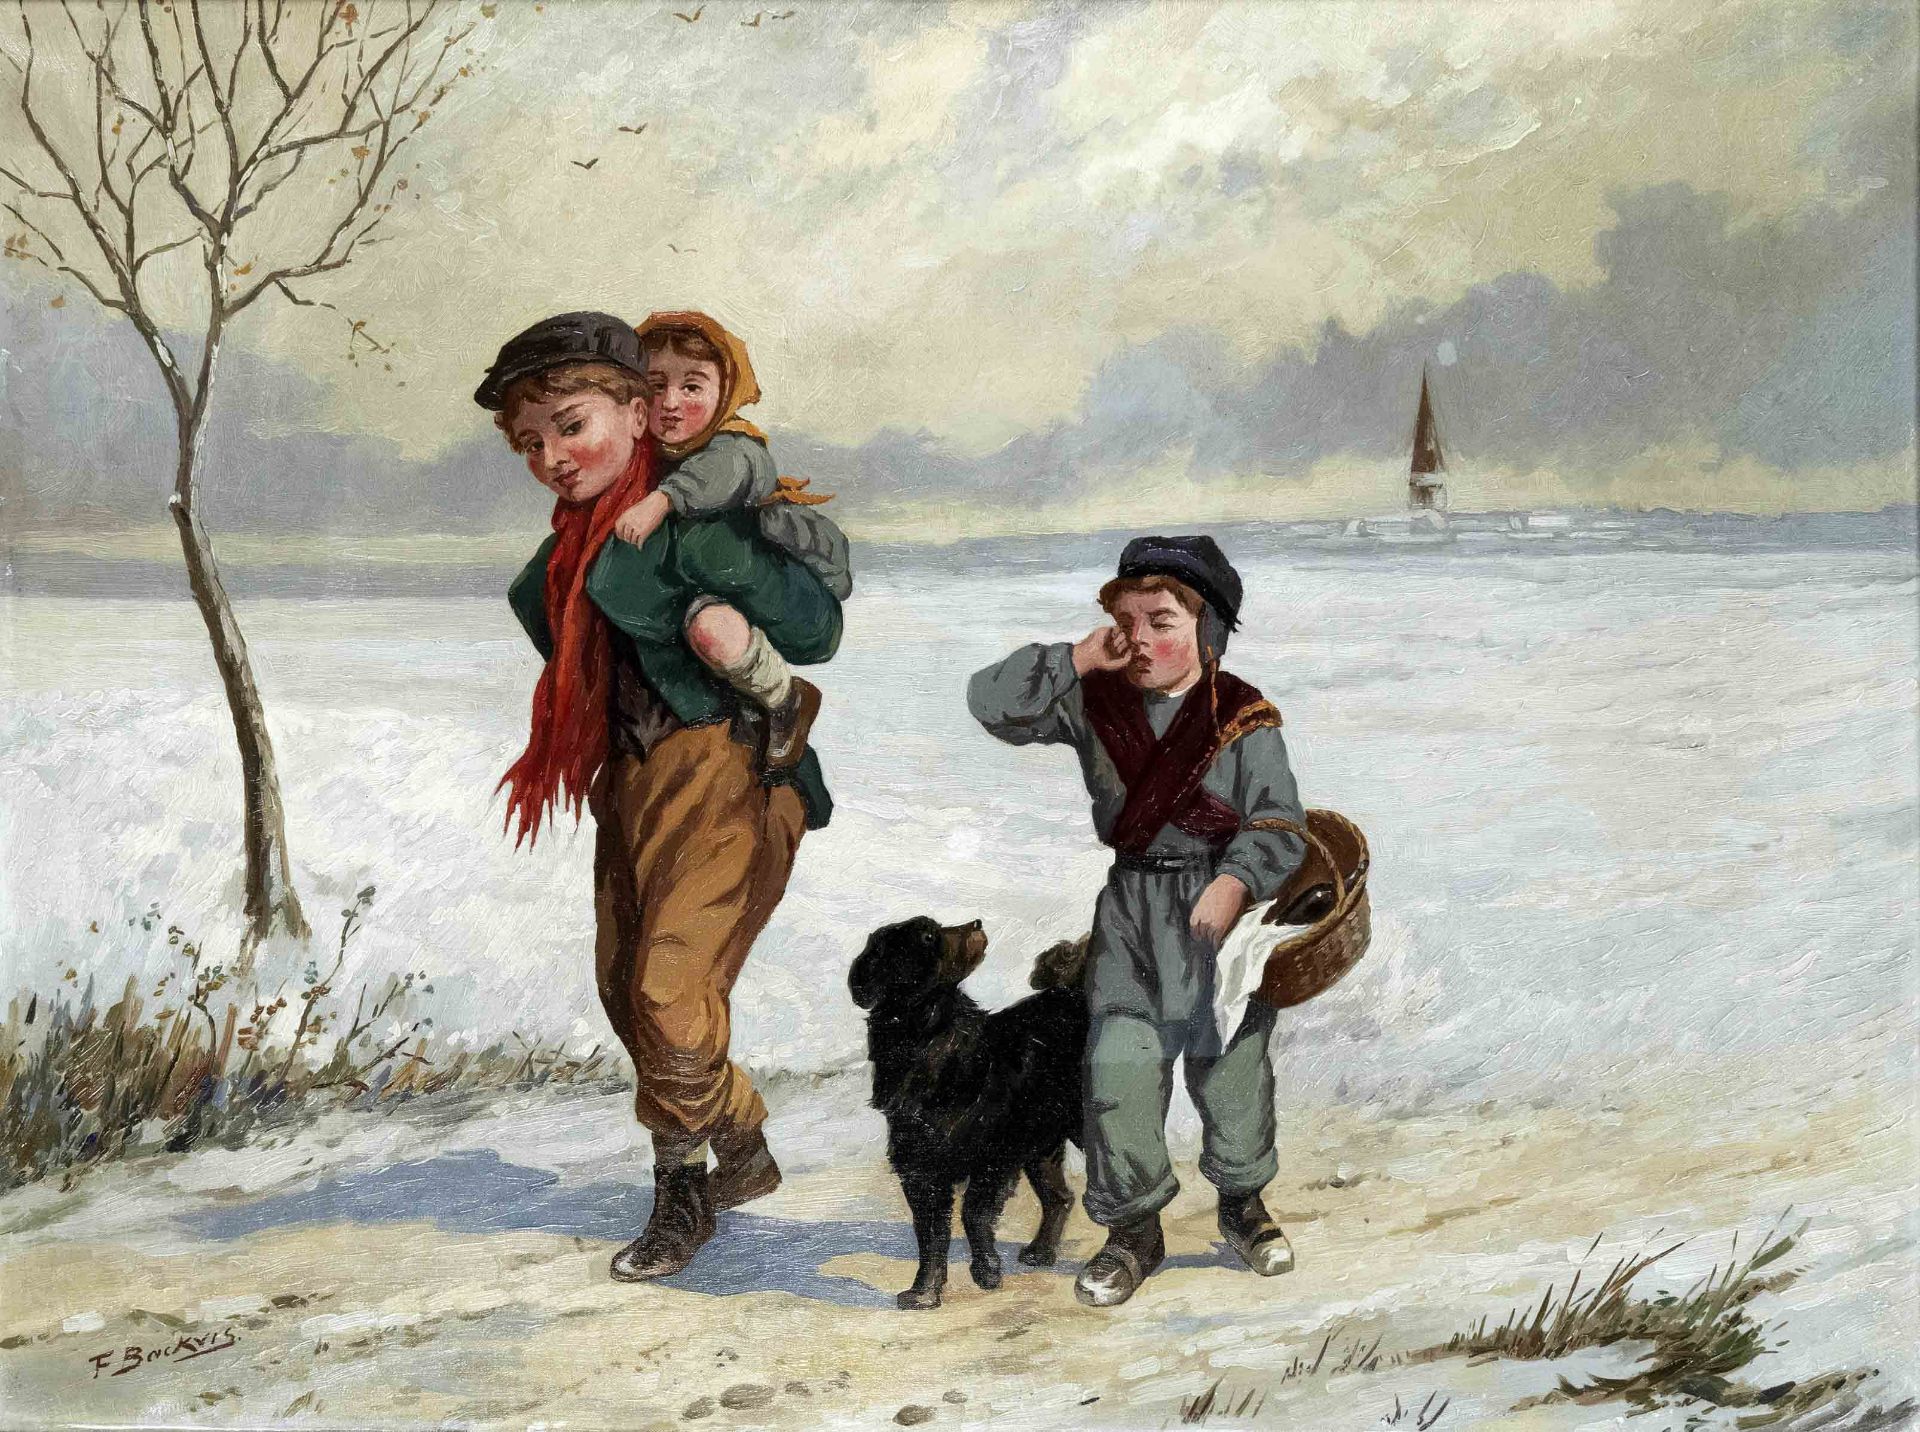 F. Backvis, 1st half of the 20th century, Winter painting with returning children and dog, oil/